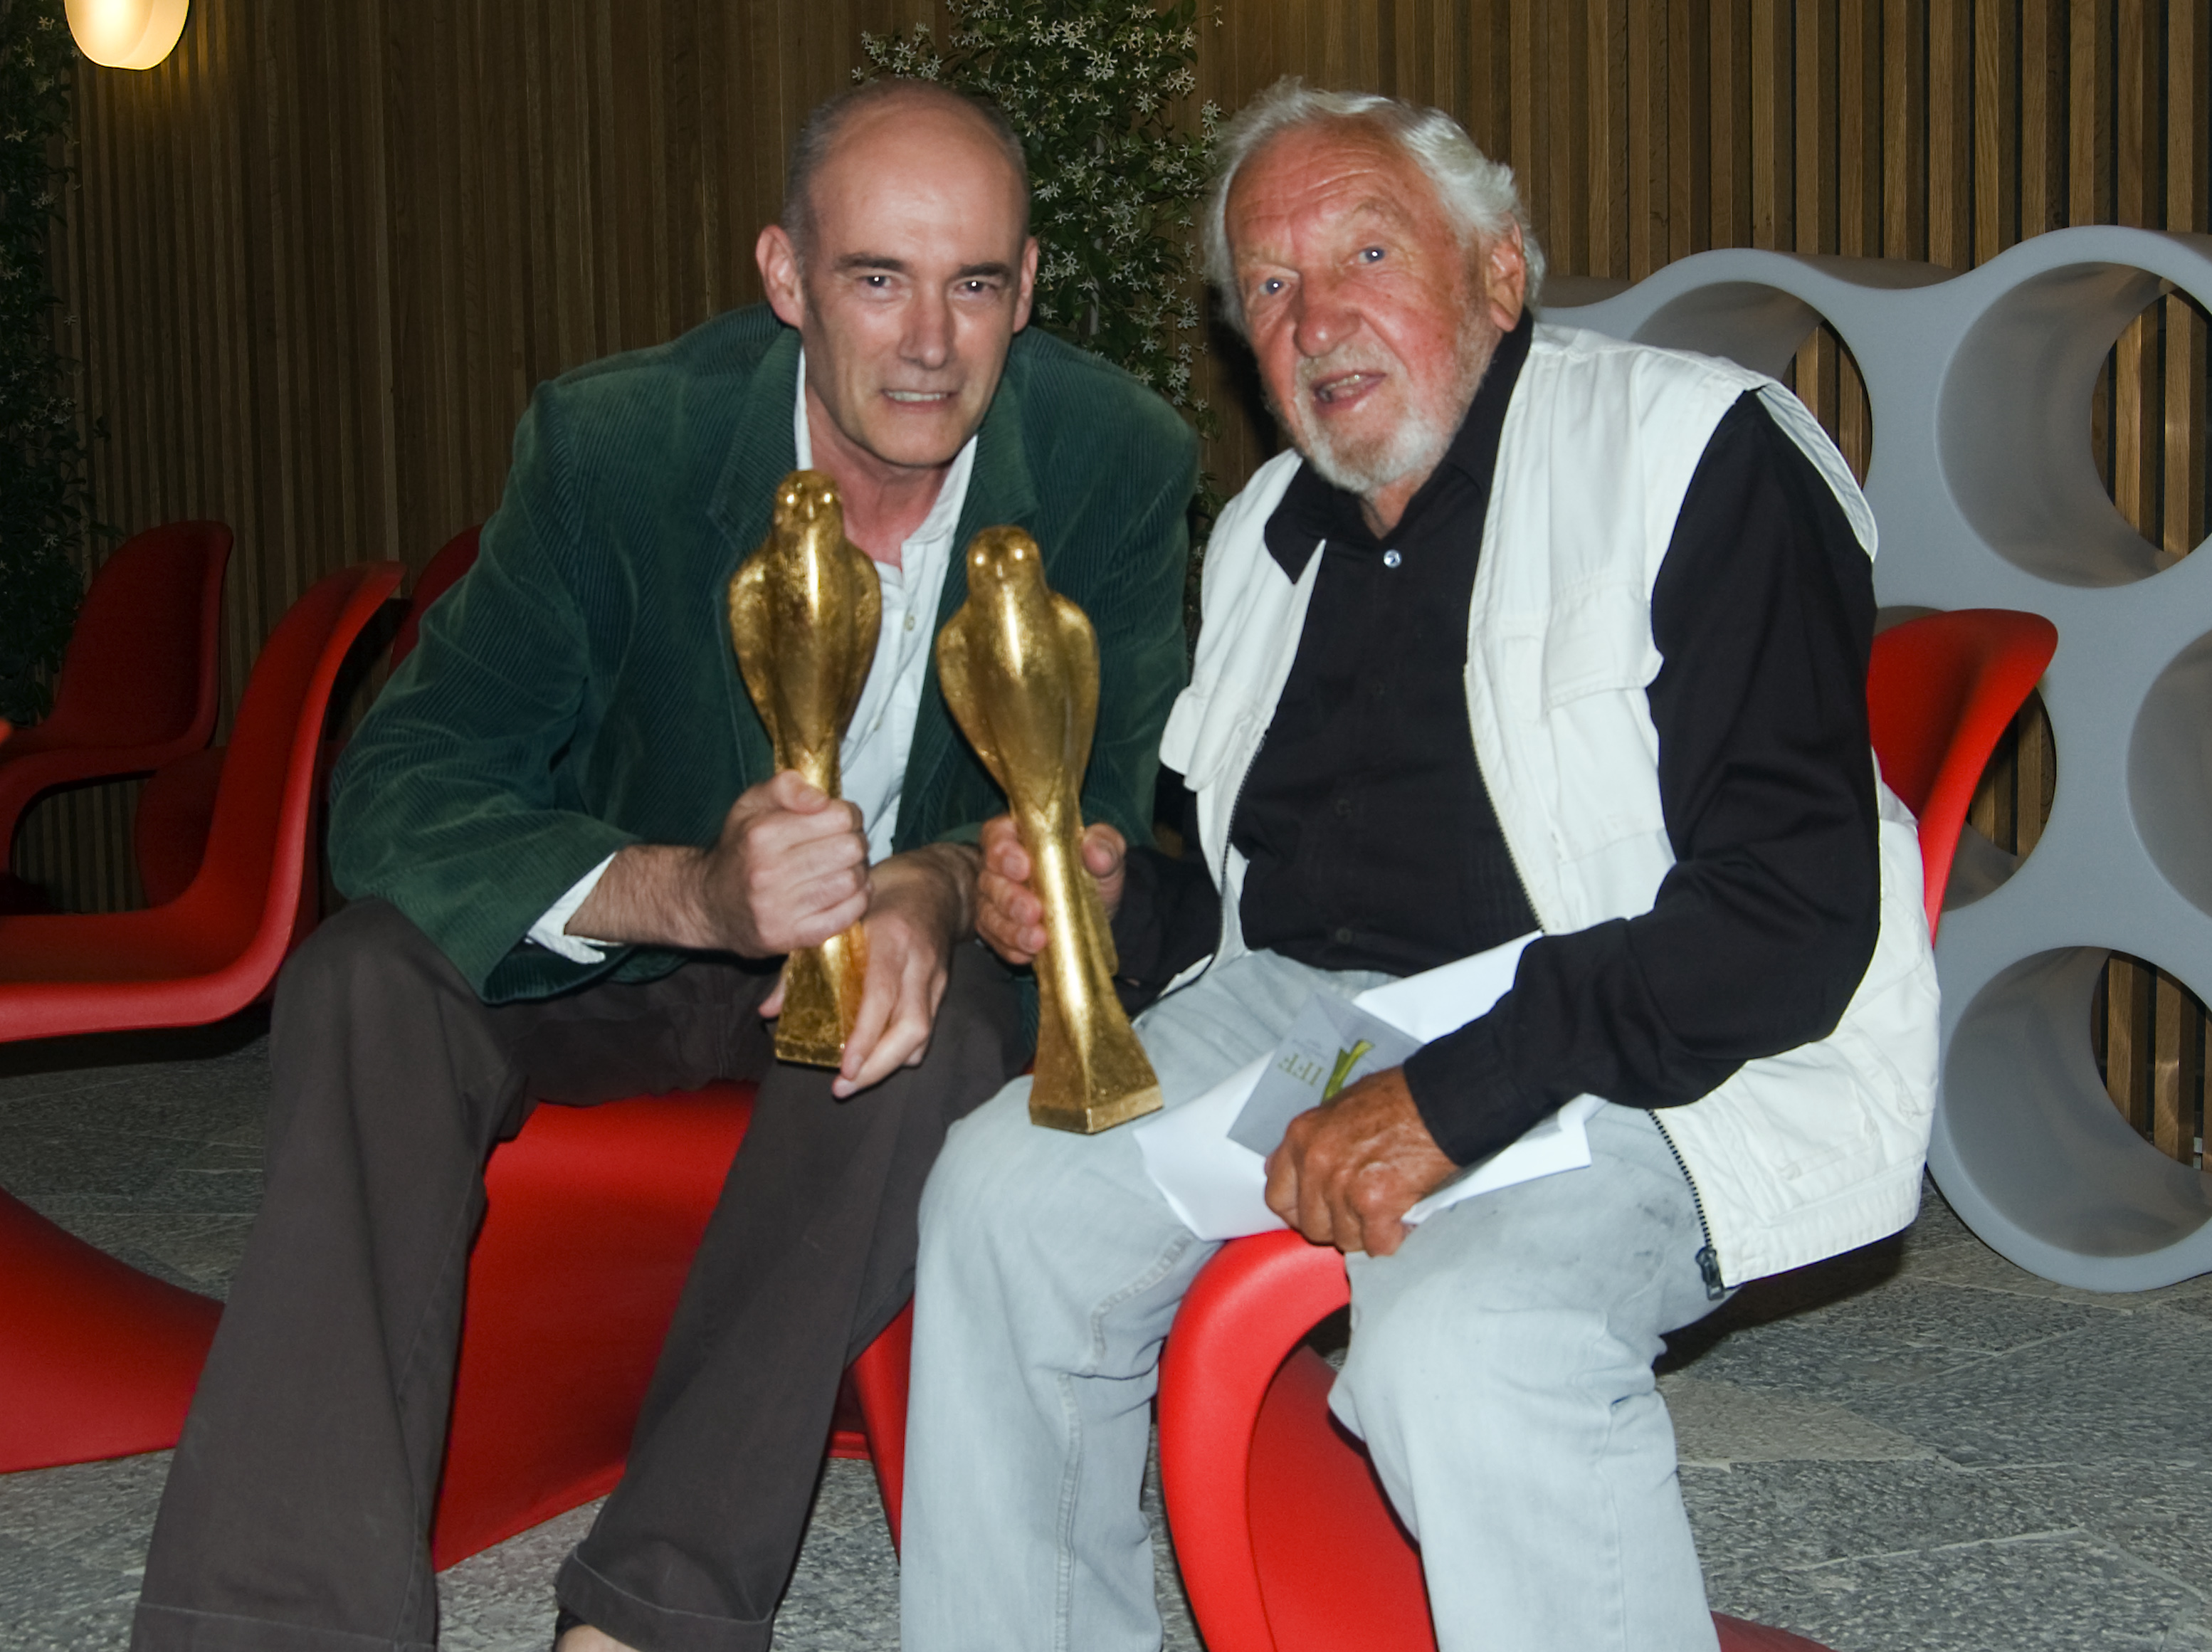 Ibiza Film Festival. Ian Vernon (Ivan D Rennov) with his Best Cinematography award and legendary Cinematographer Ronnie Taylor (Oscar Winner for Gandhi).